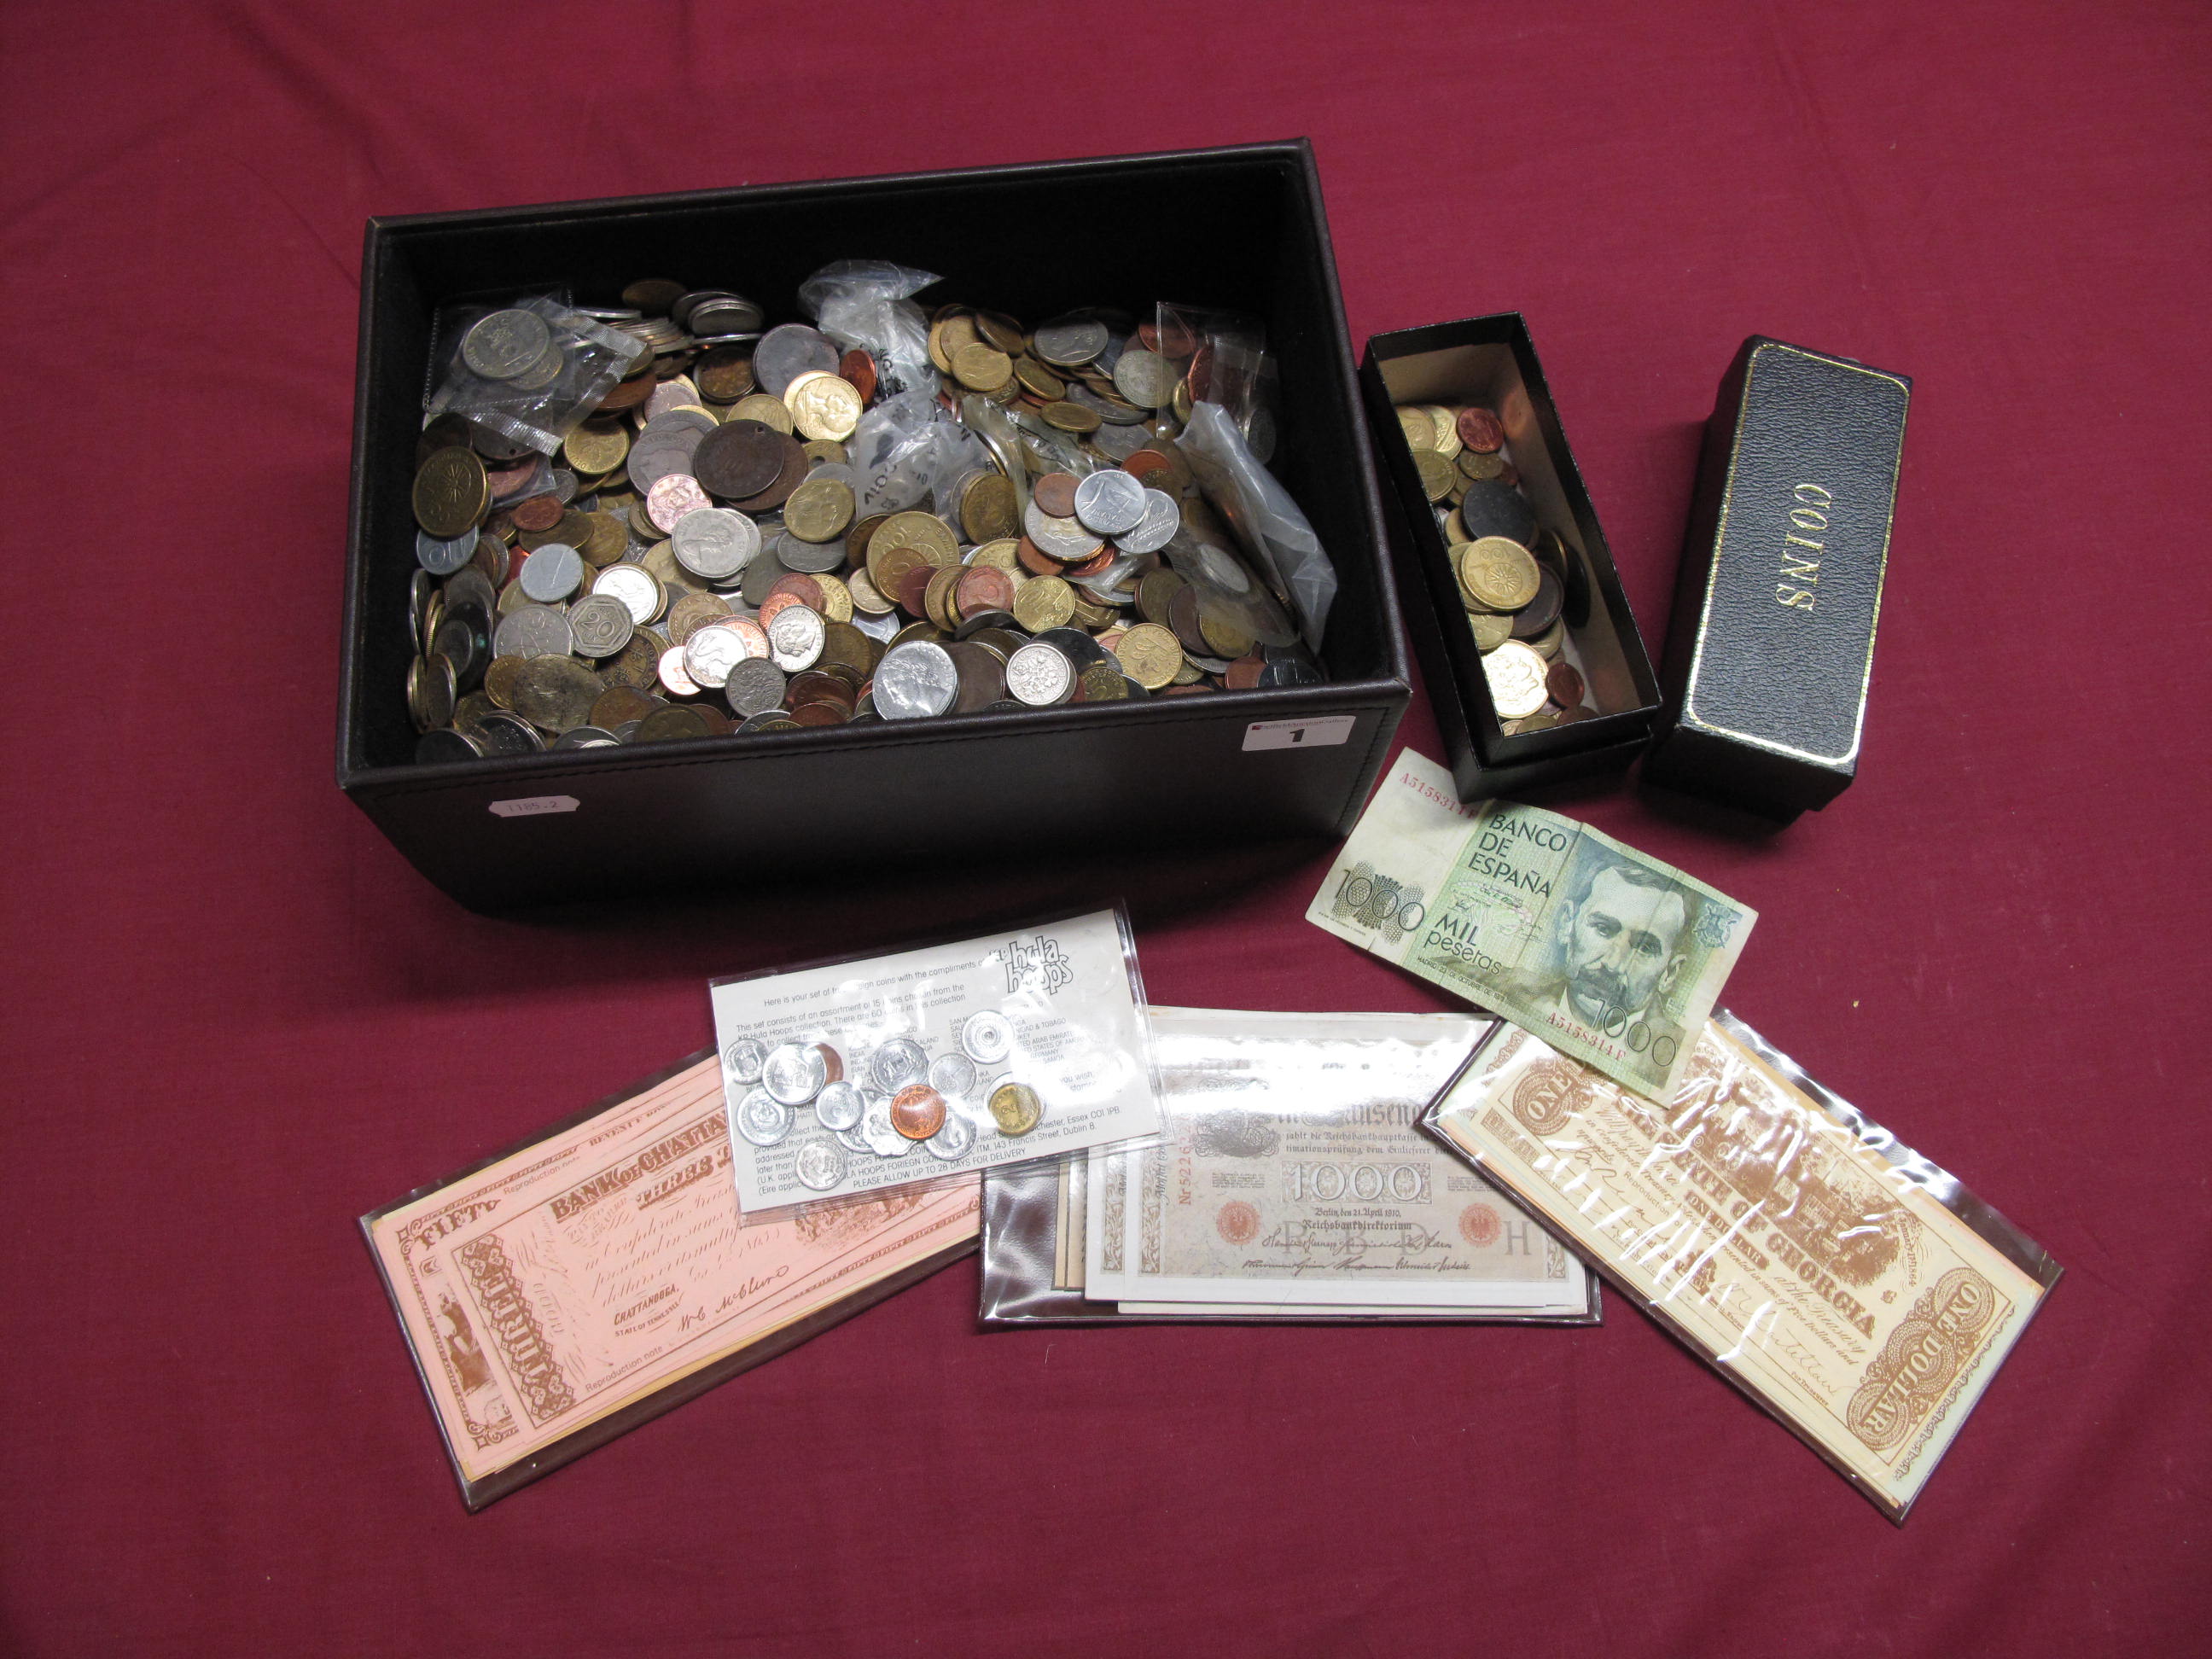 A Quantity of Overseas Base Metal Coins, many countries represented including Hong Kong, Greece,